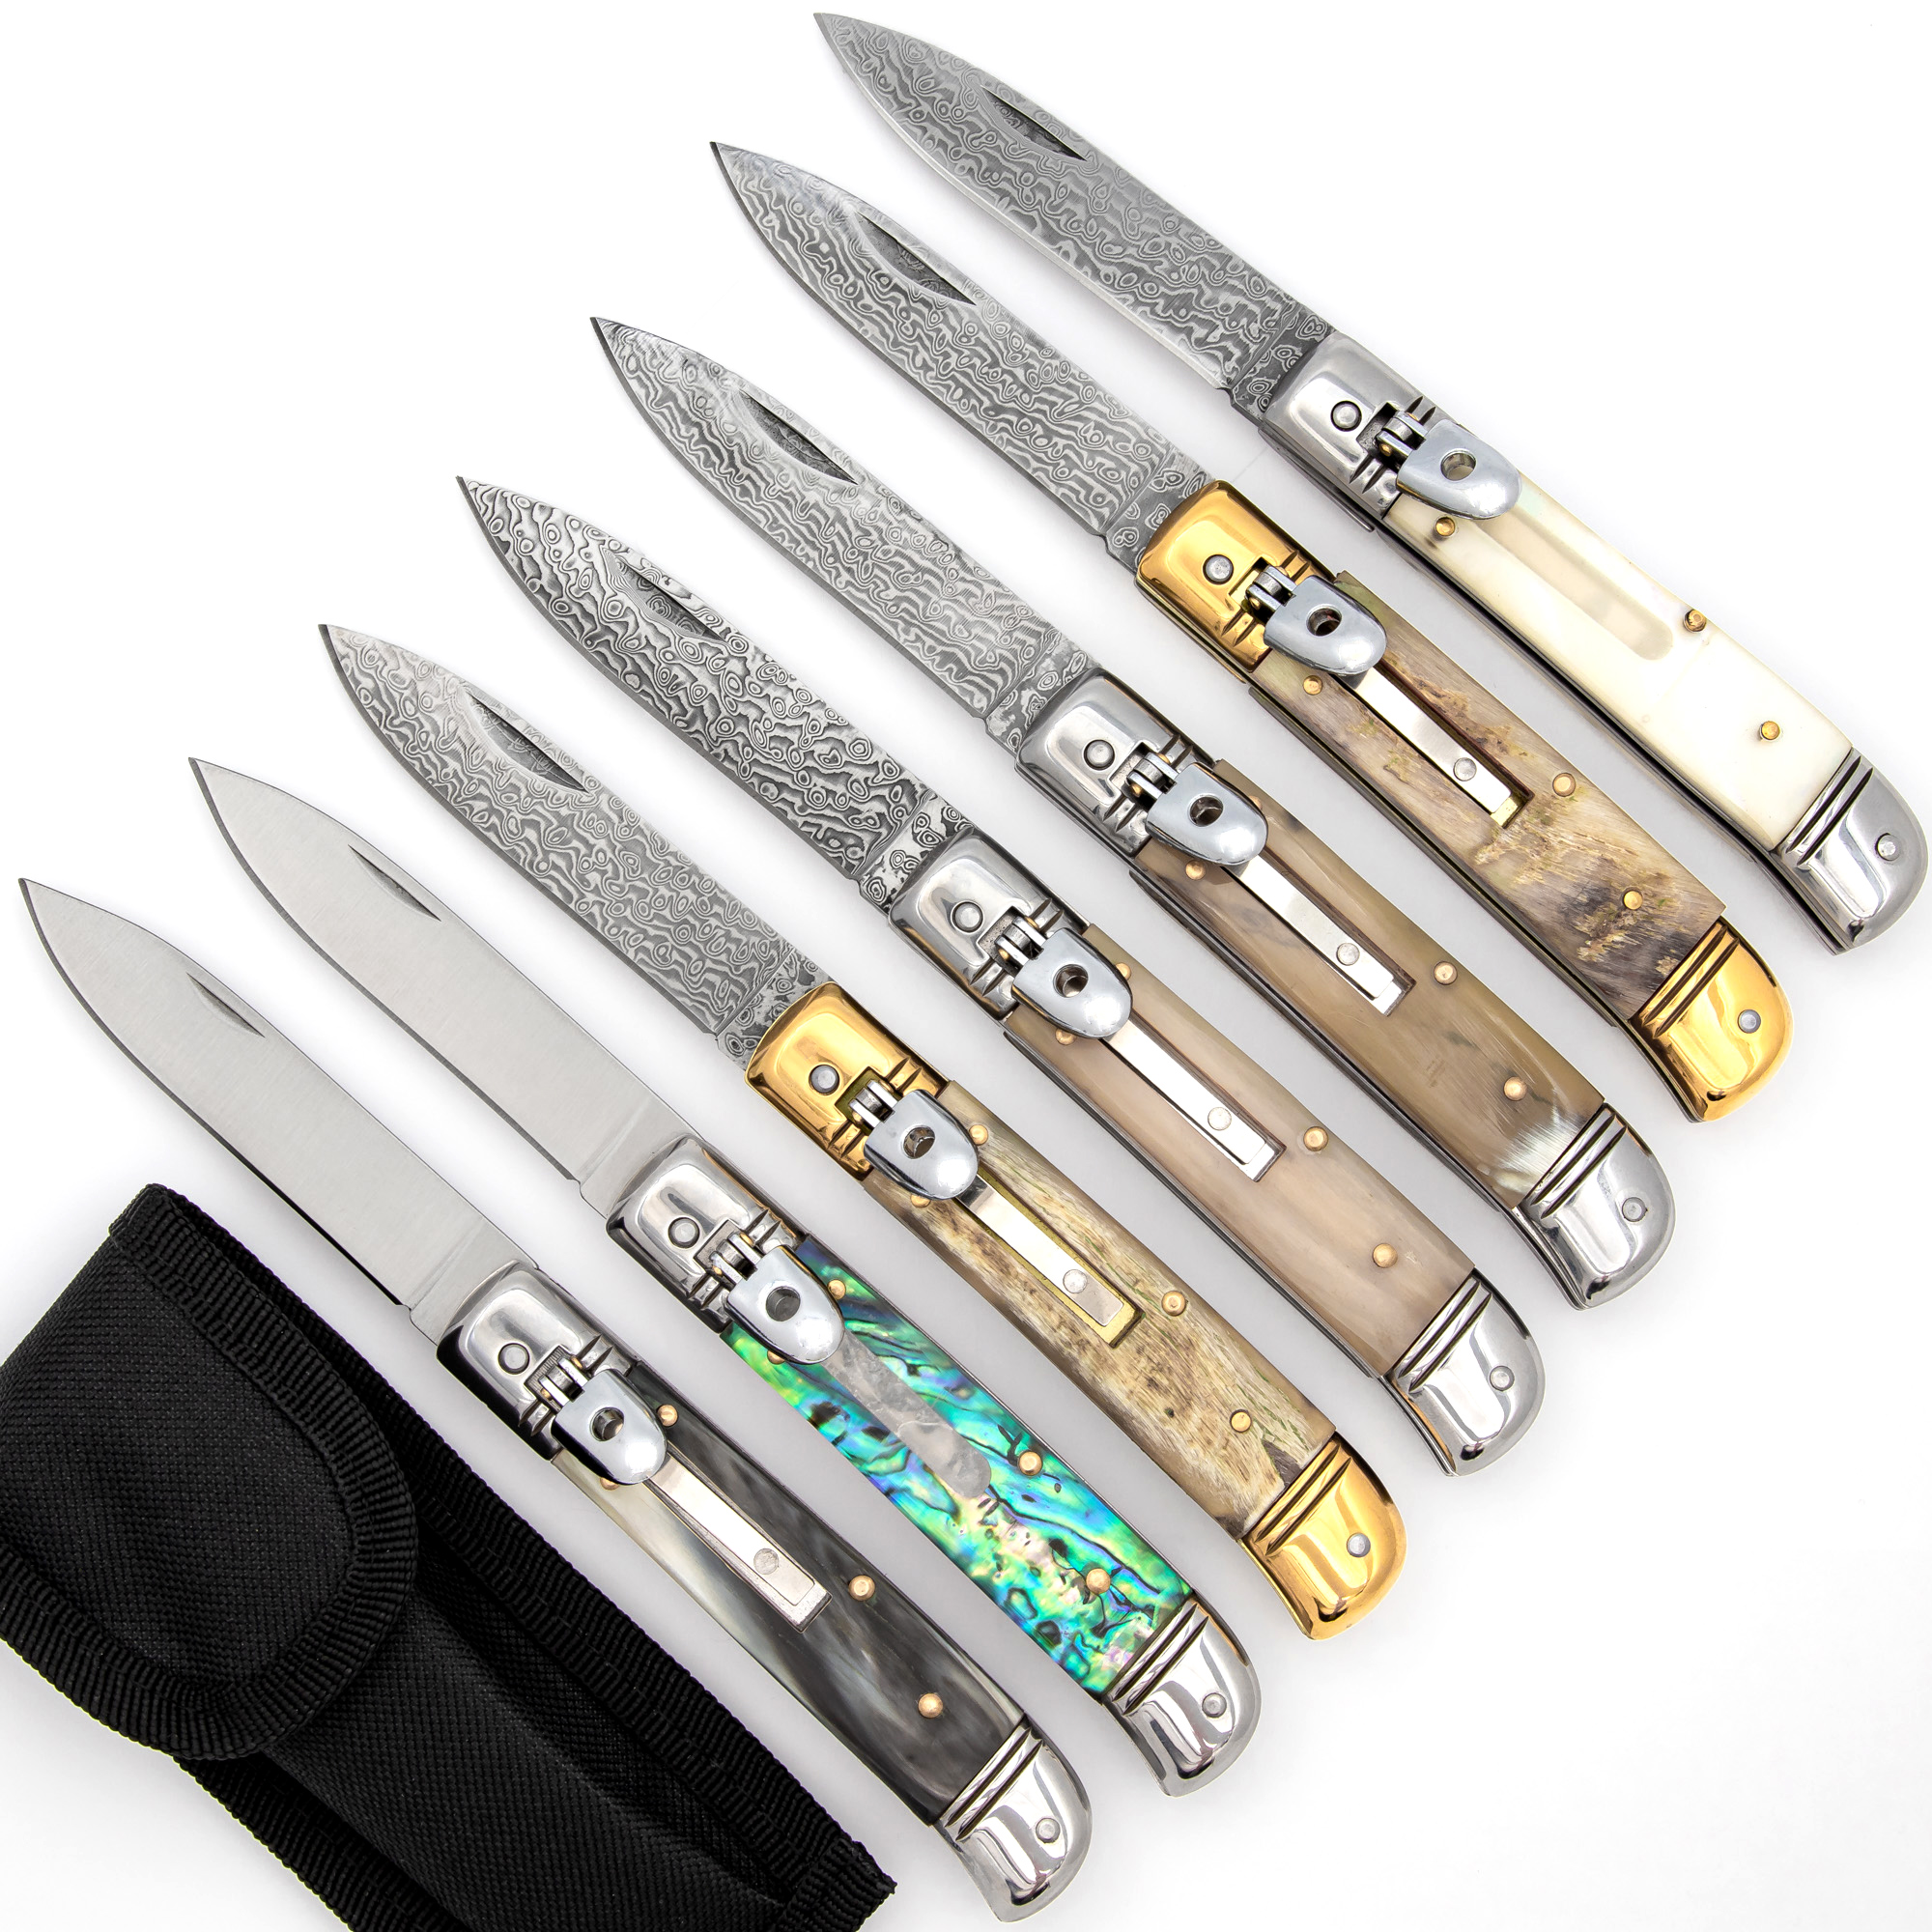 Automatic Land to Surf Lever Lock SWITCHBLADE Selection Horn & Pearl Grips Choice of 7 Knives